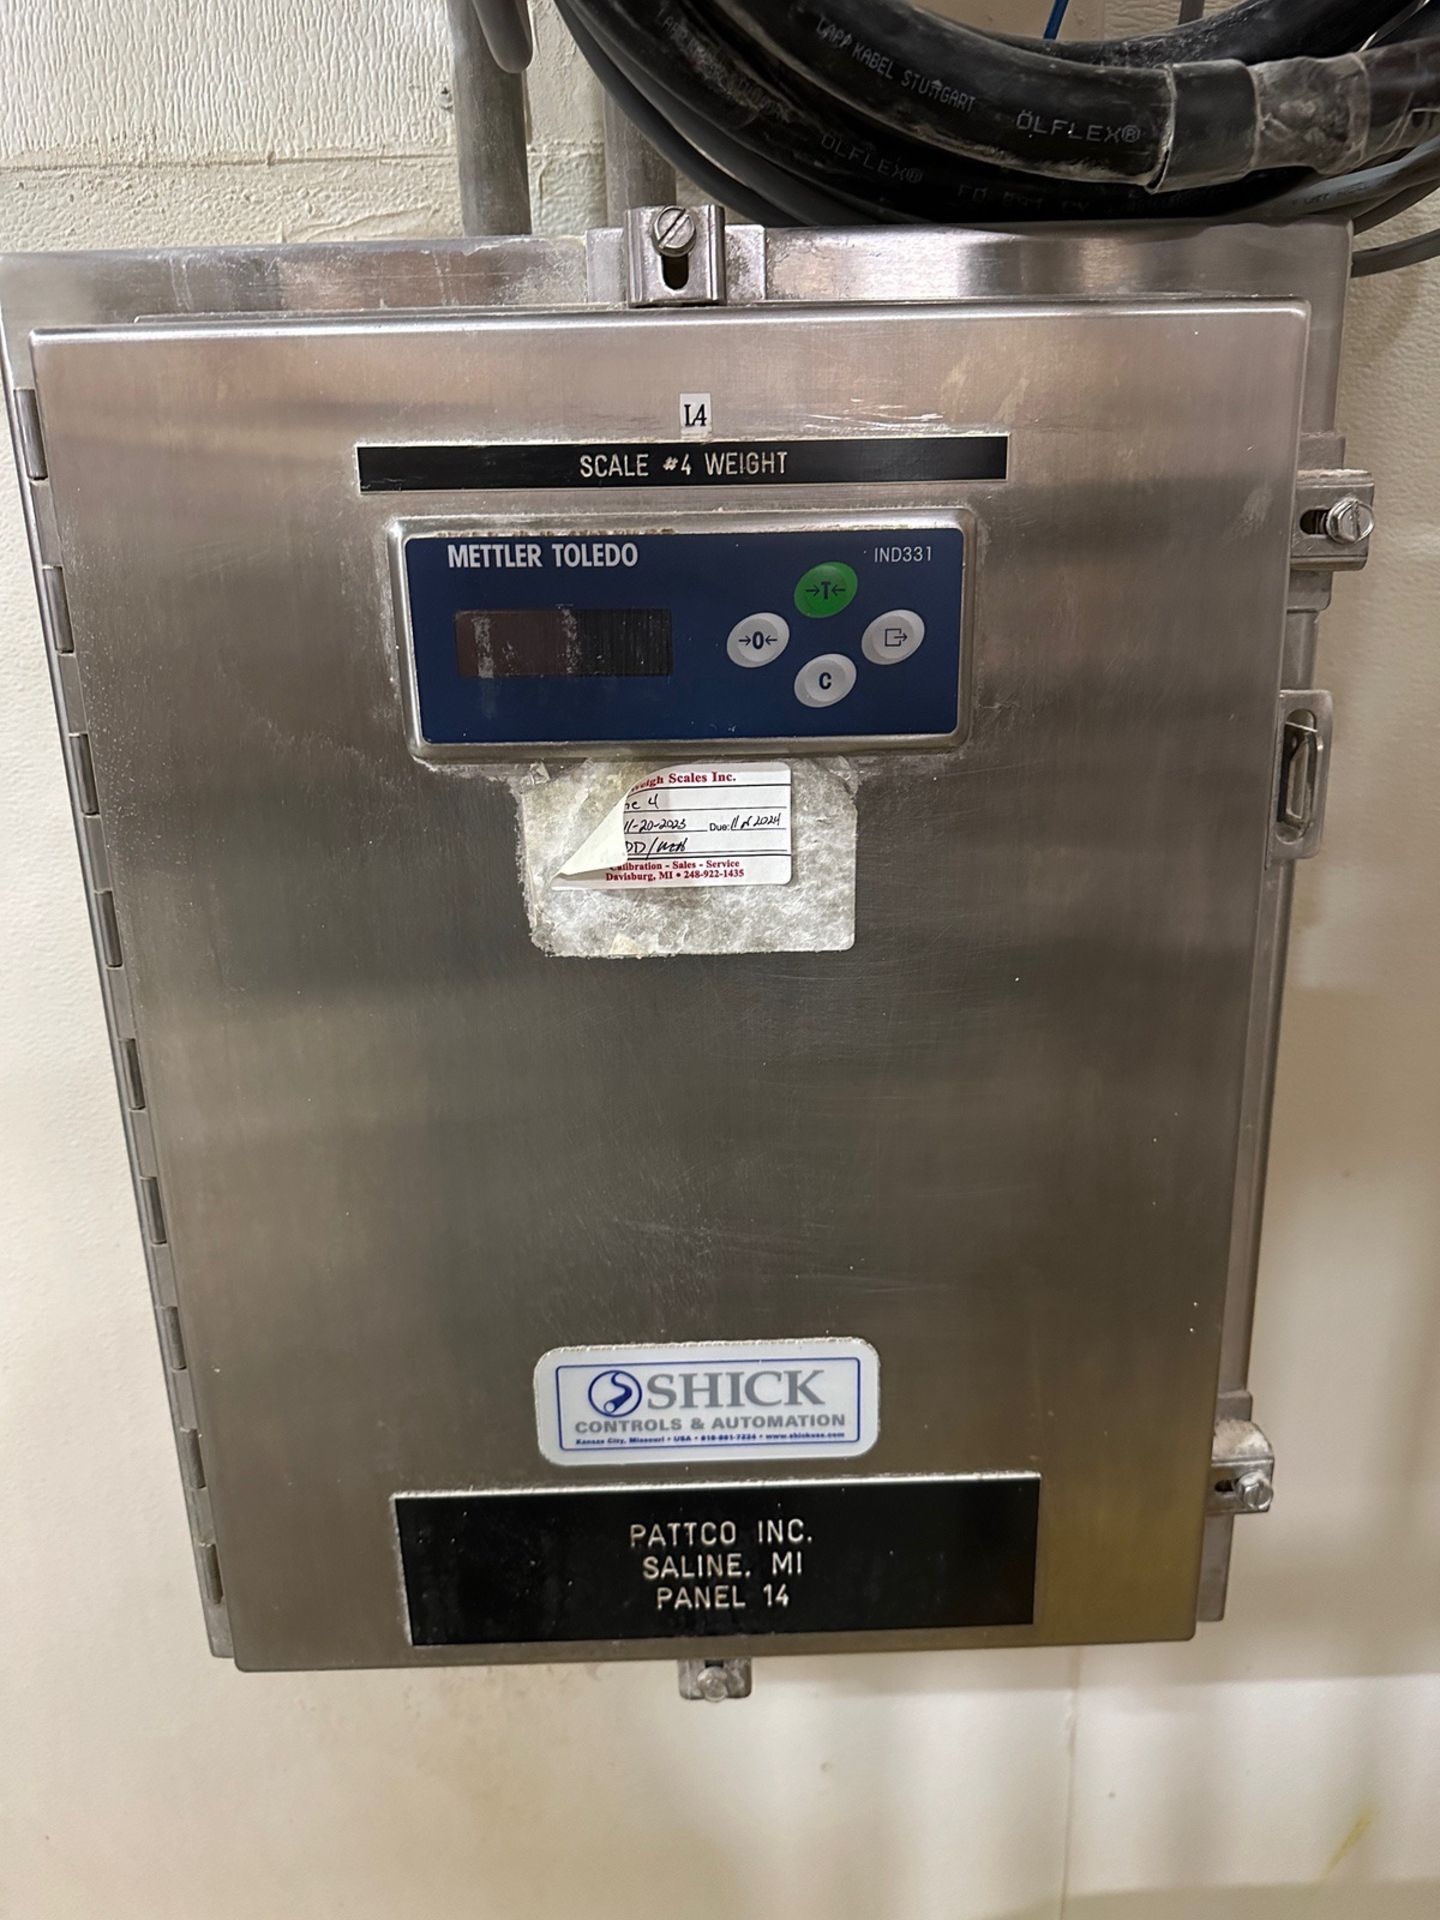 Shick Stainless Steel Ingredient Hopper On Load Cells with Mettler Toledo DRO | Rig Fee $1800 - Image 6 of 7